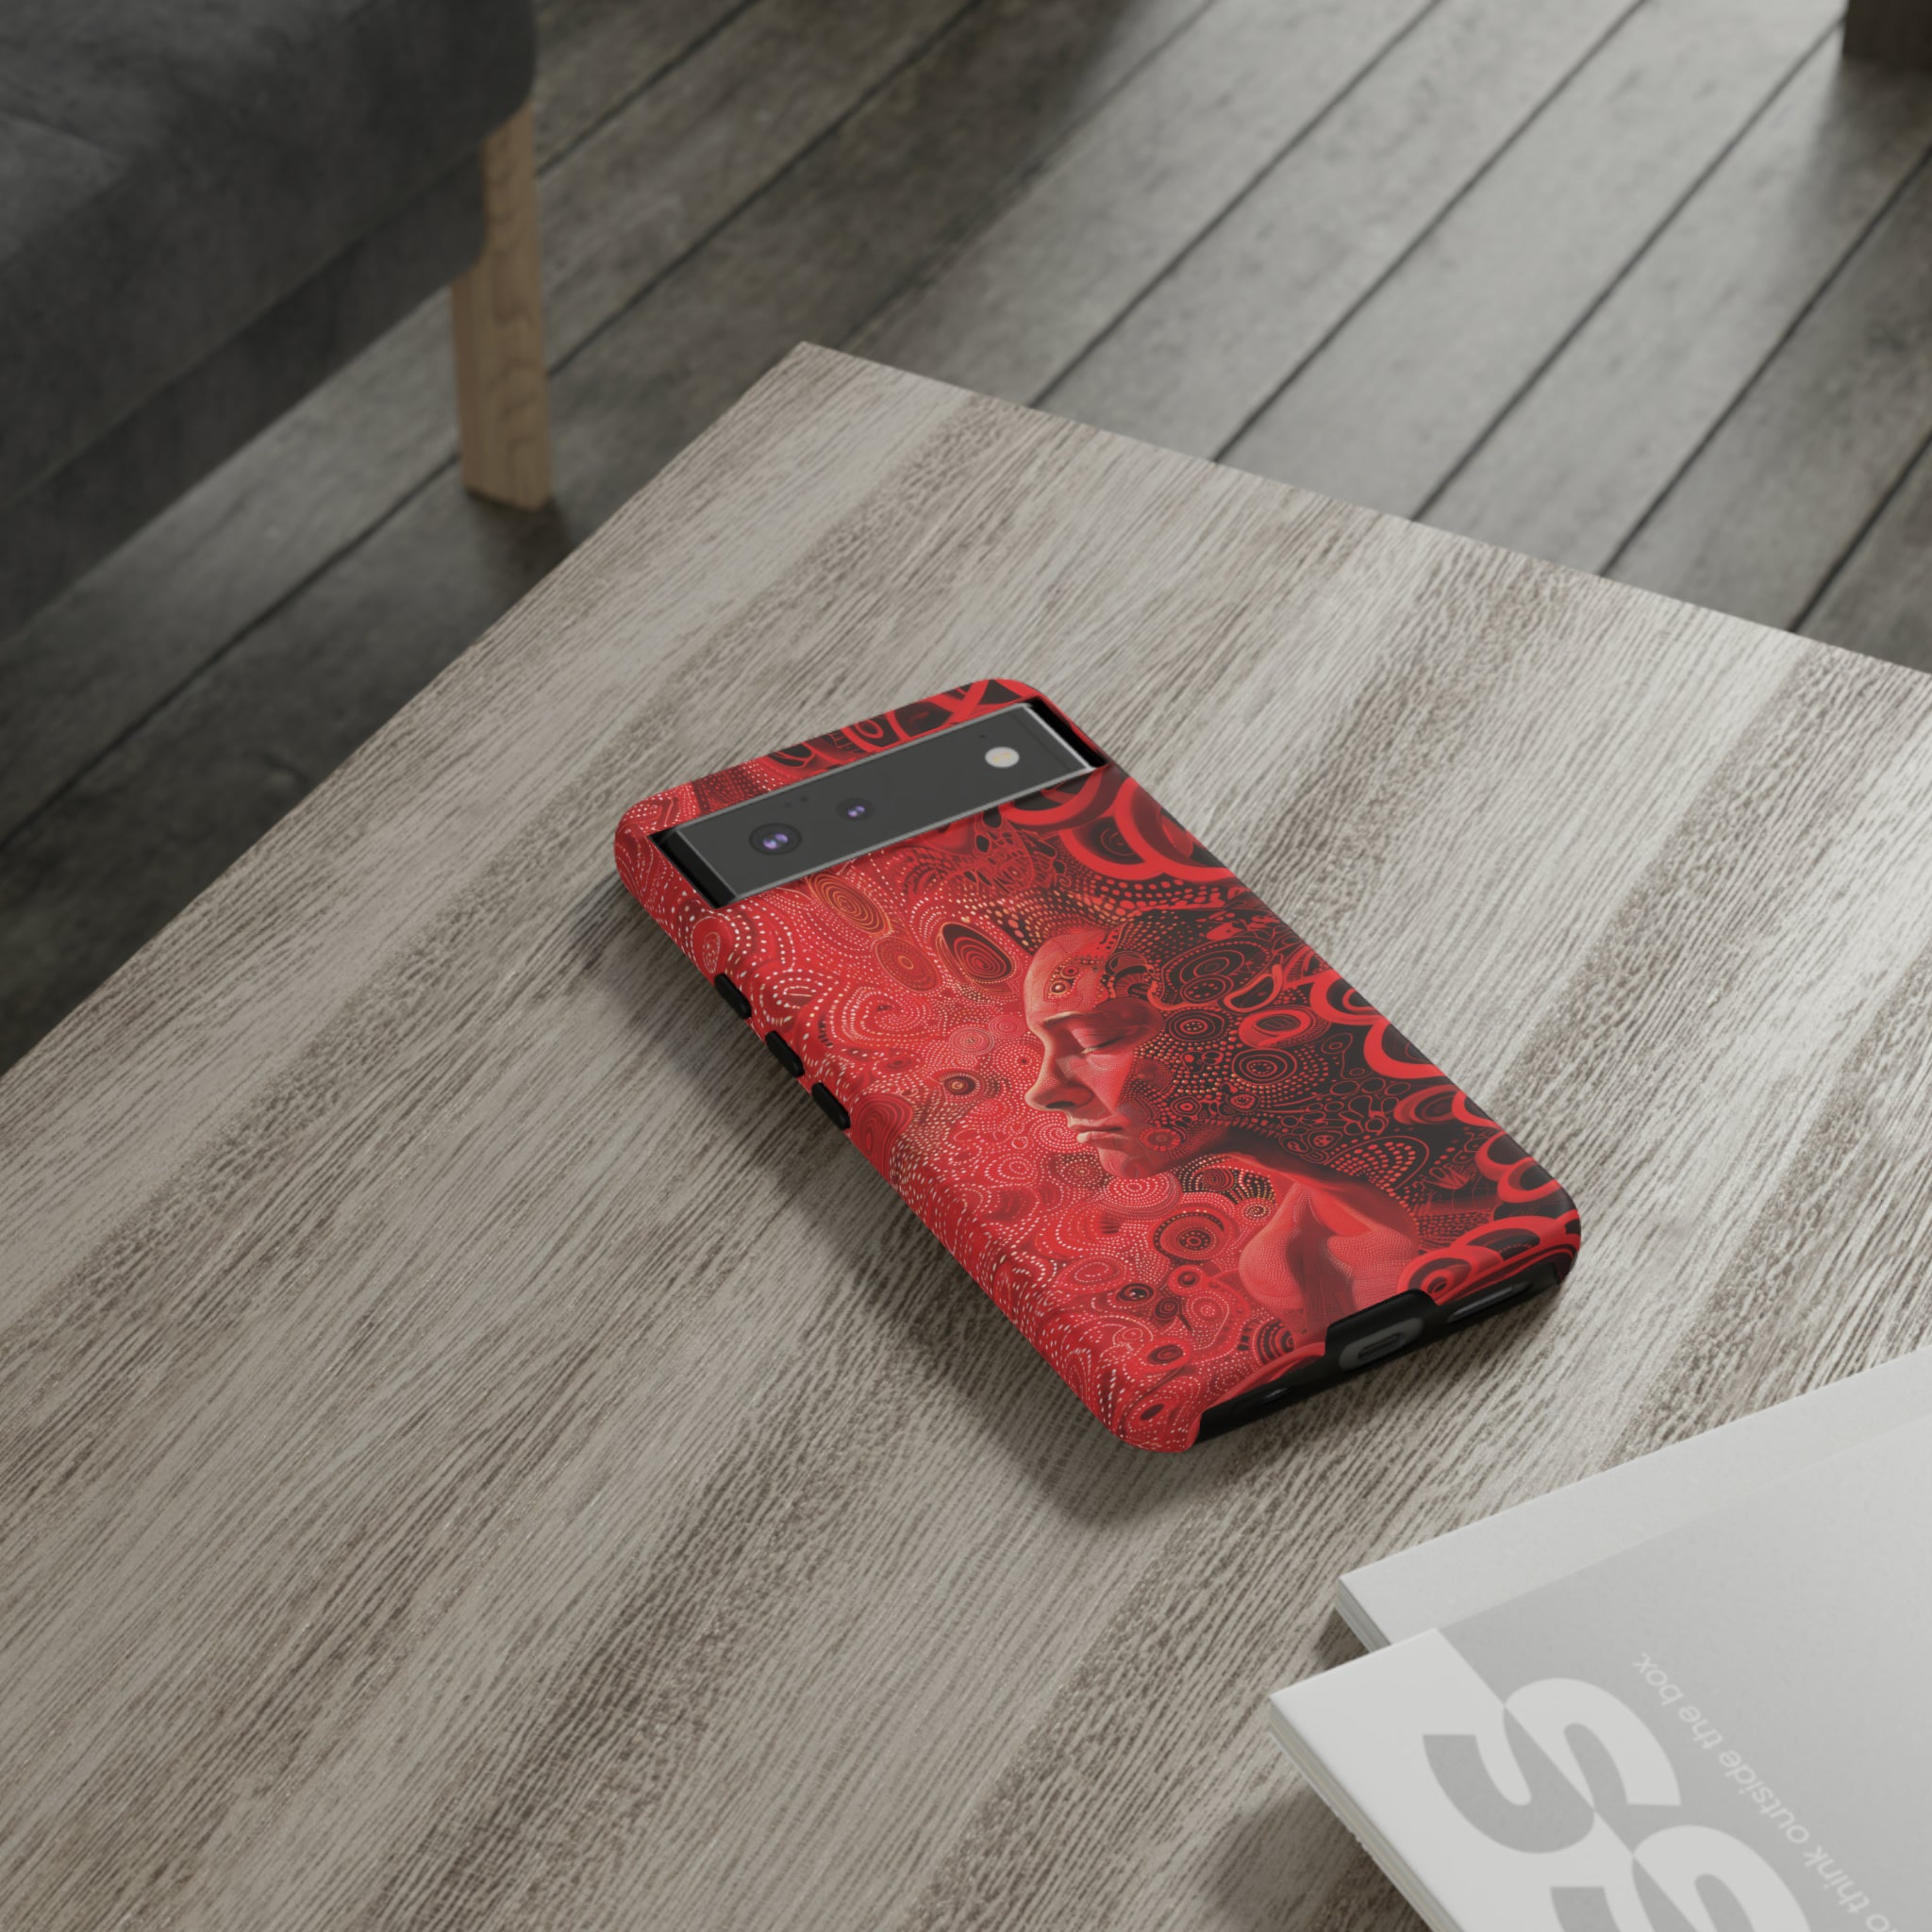 Phone Case, woman in red, Artistic design, Tough Case, red whimsical fantasy design, iPhone 15, 14, 13, 12, 11, Samsung, Pixel